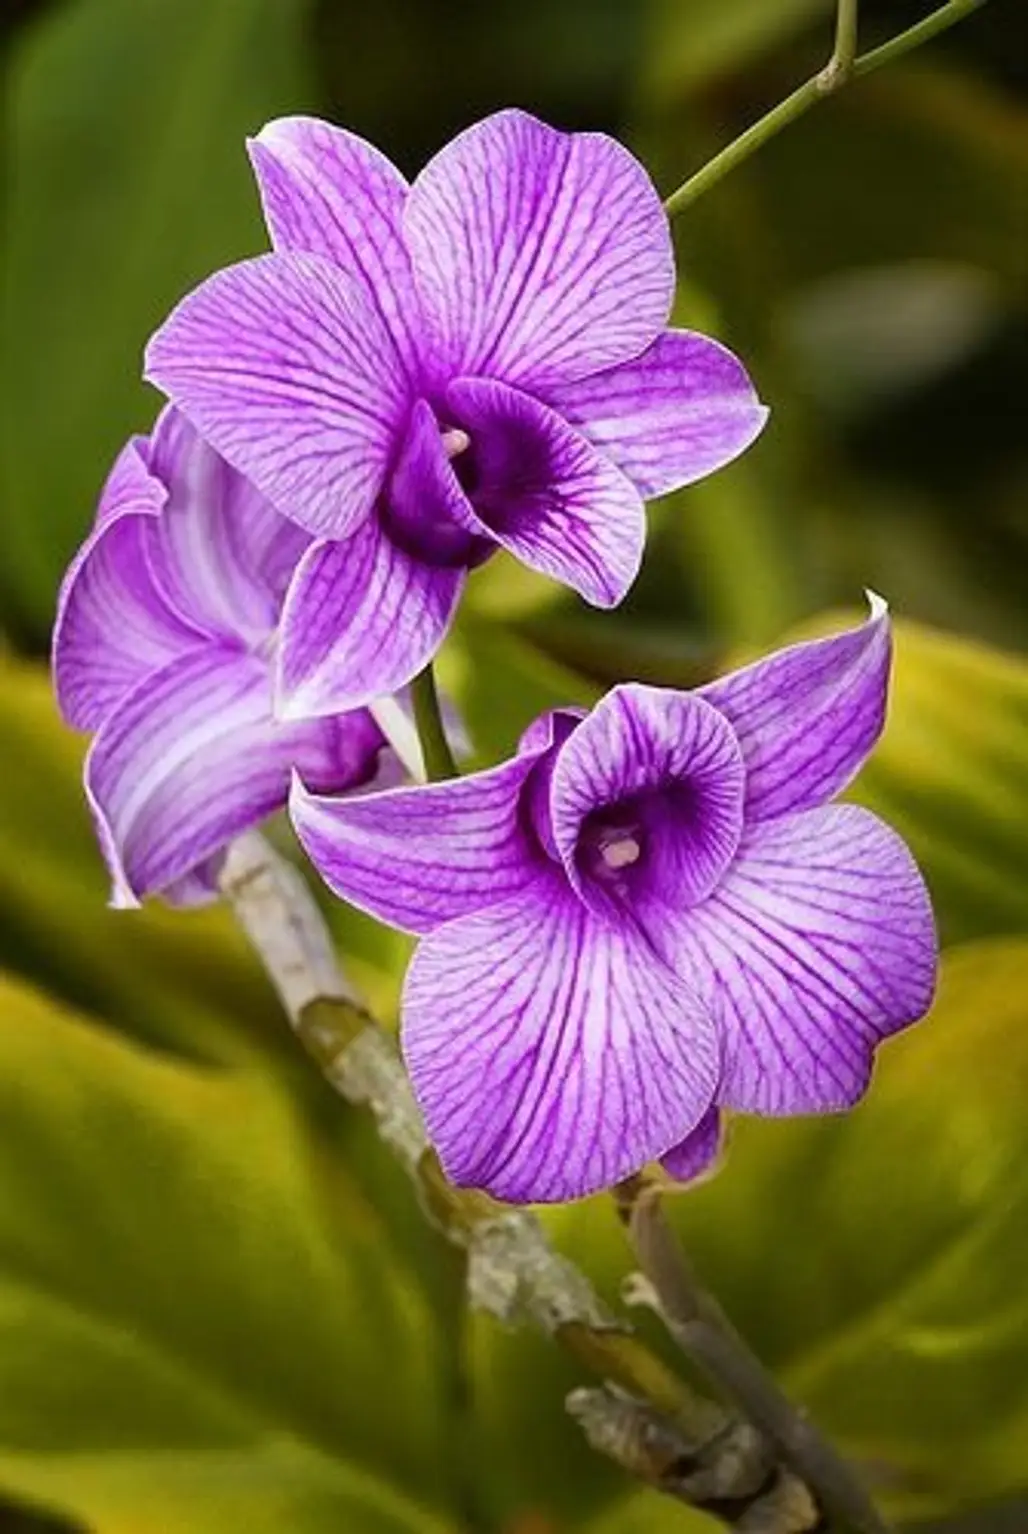 Radiant Orchid